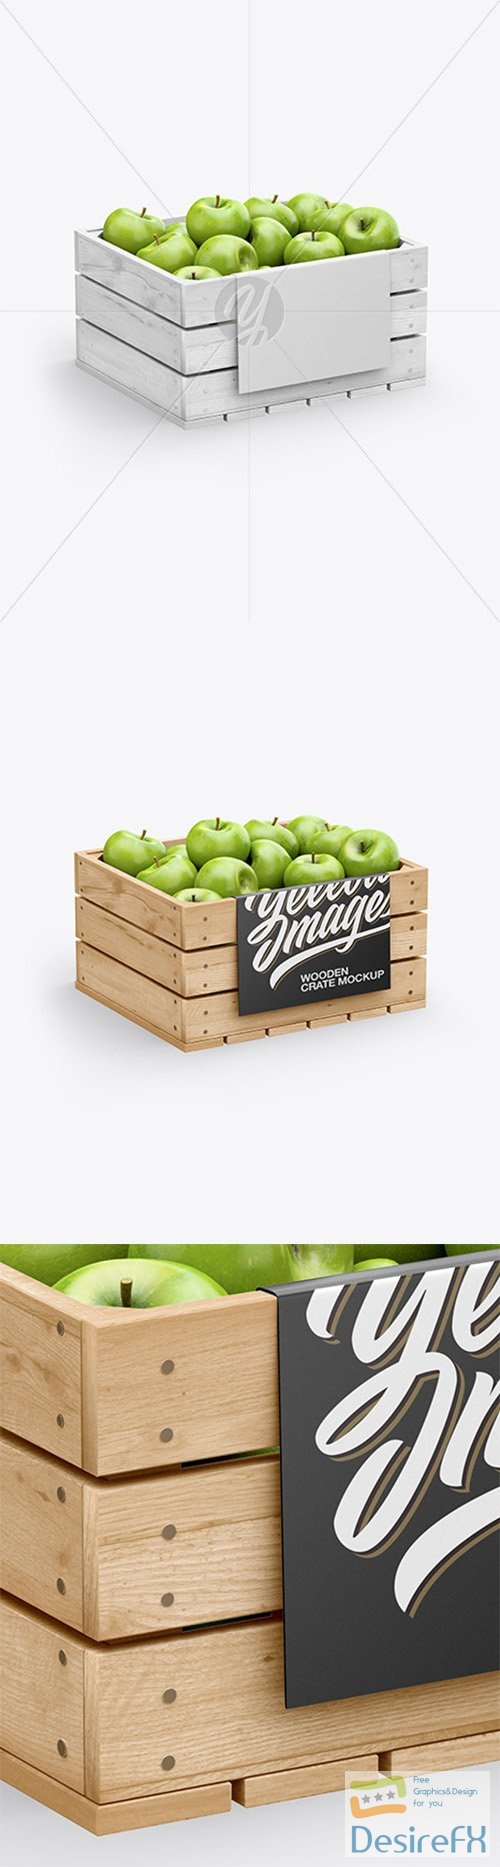 Crate with Green Apples Mockup 78464 TIF